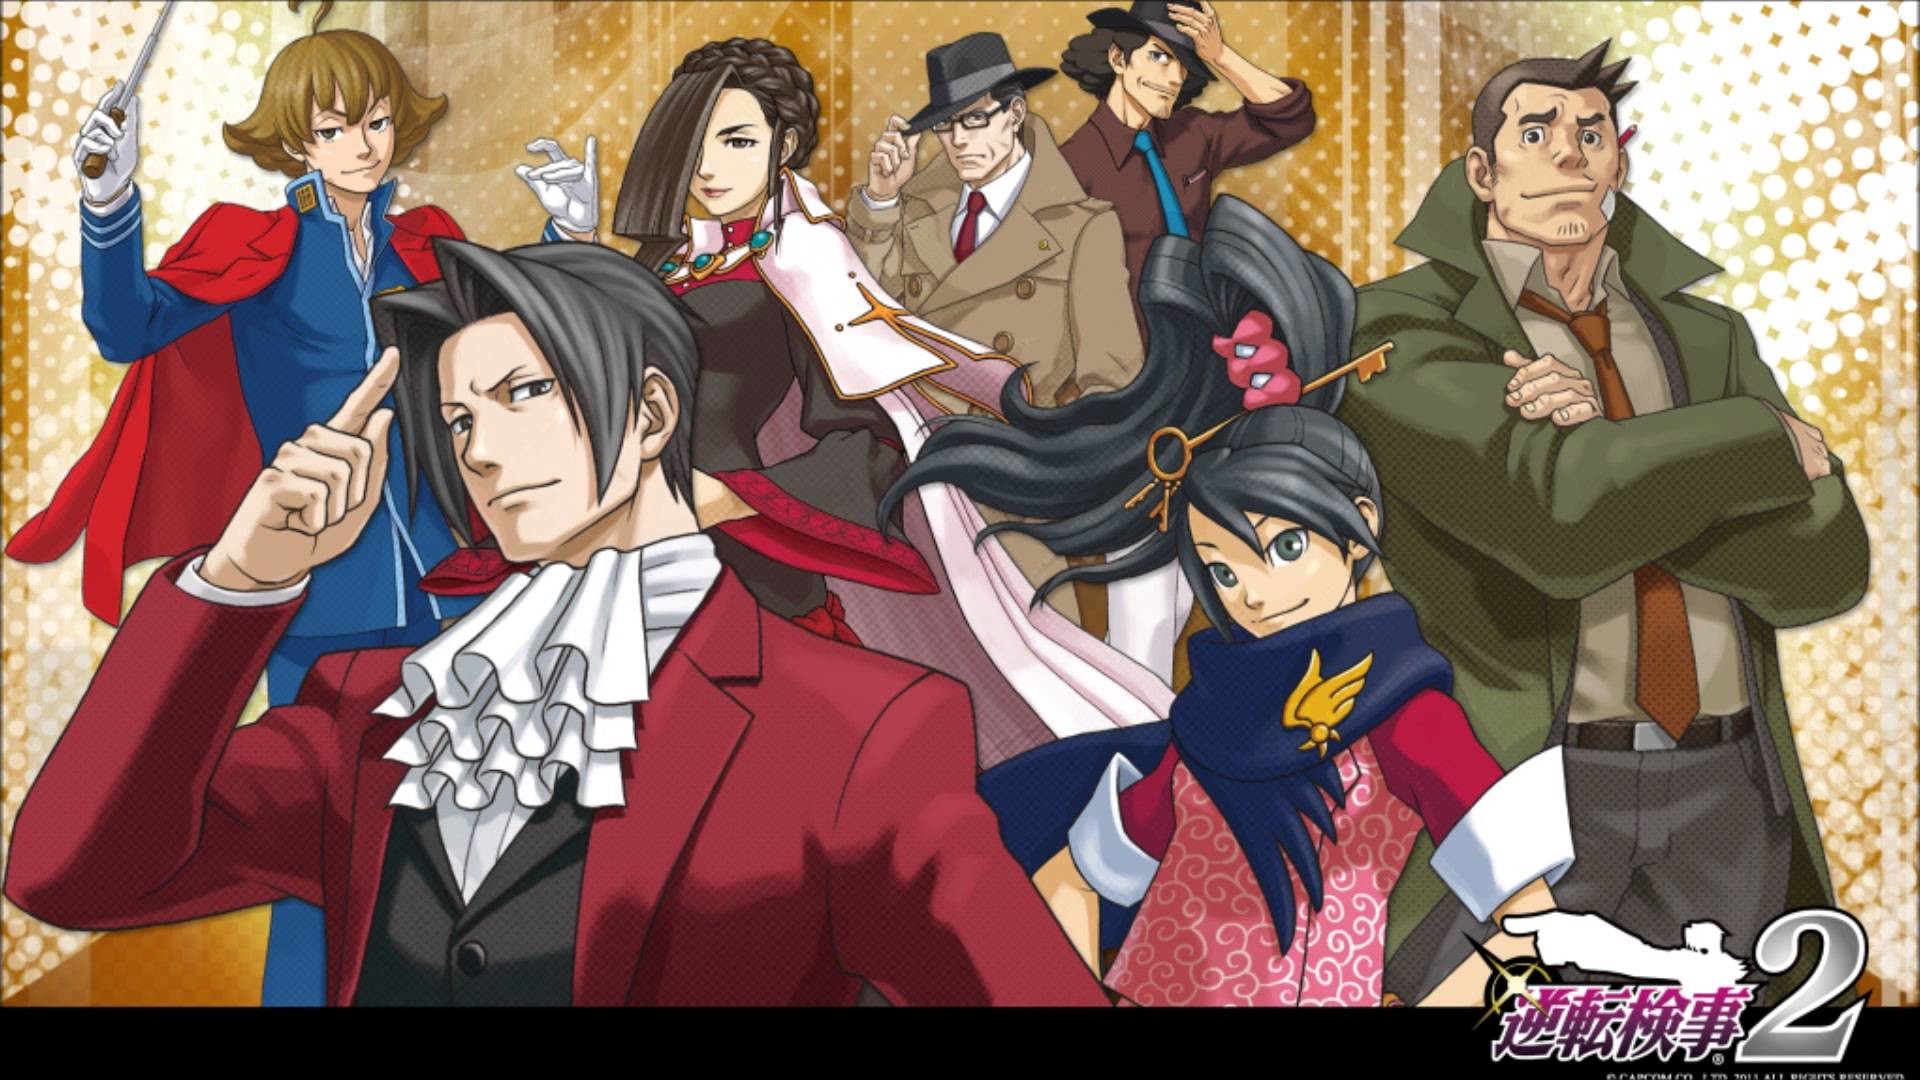 1920x1080 Phoenix Wright: Ace Attorney Trilogy |OT| 3 games, 4 ports - Page 7 - NeoGAF